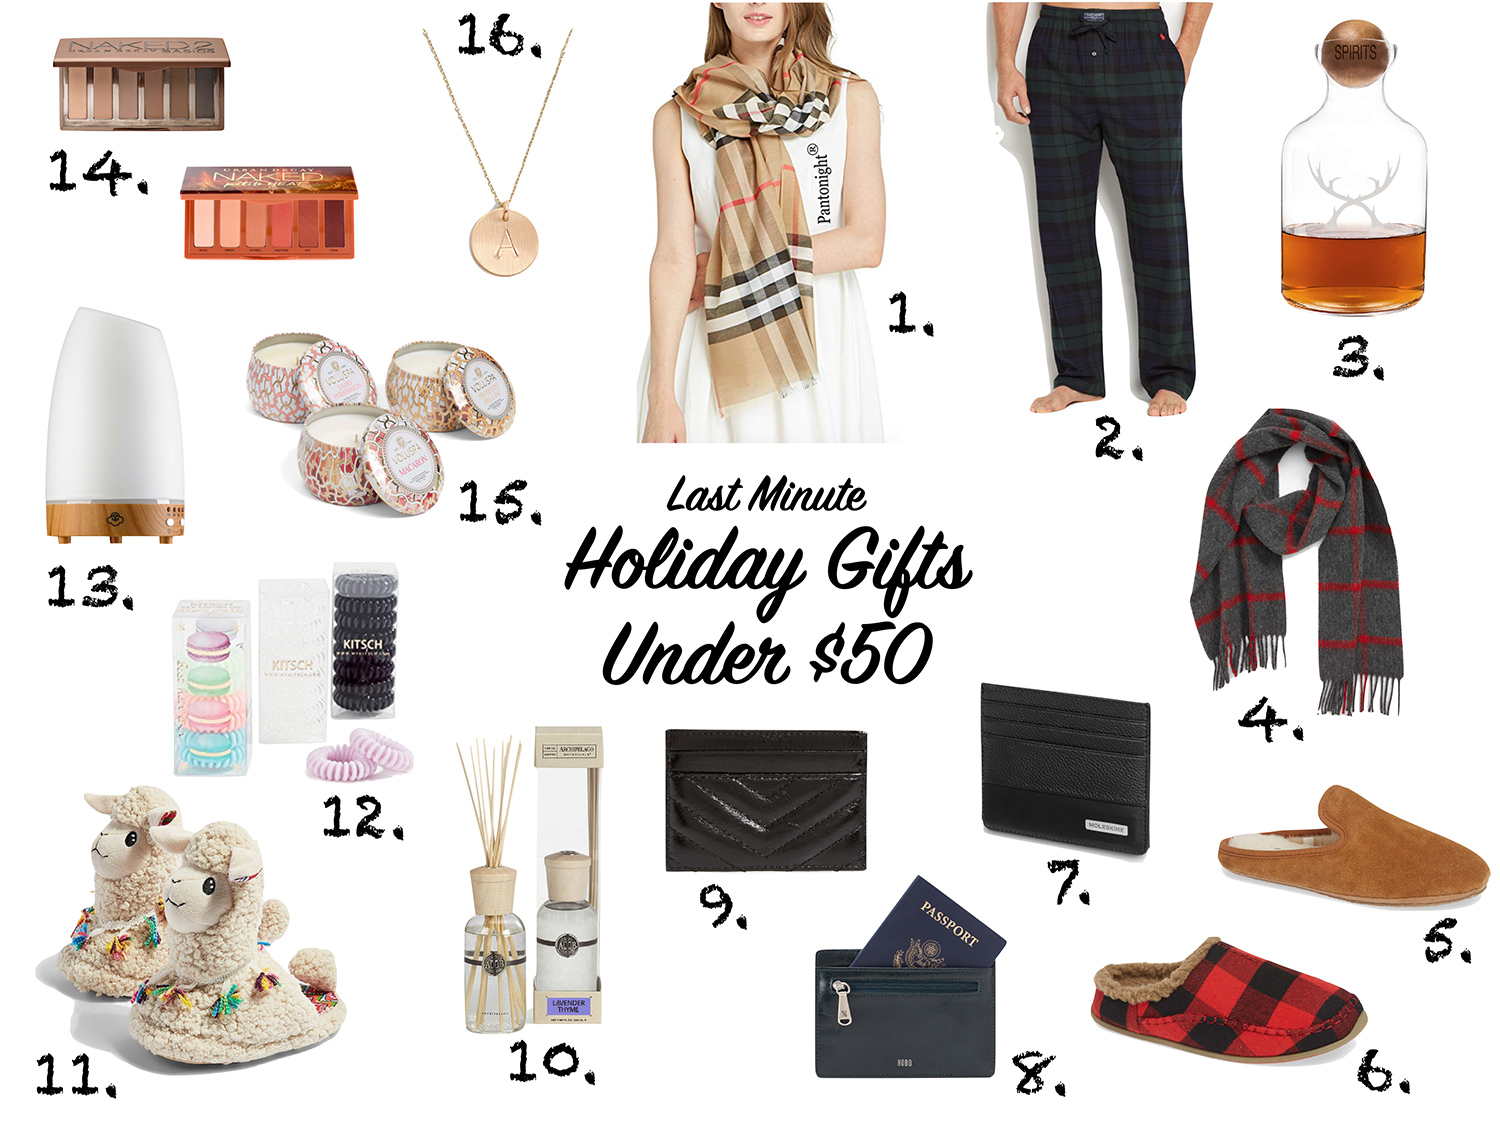 Last Minute Holiday Gift Guide: Under $30 - The Brunette Nomad